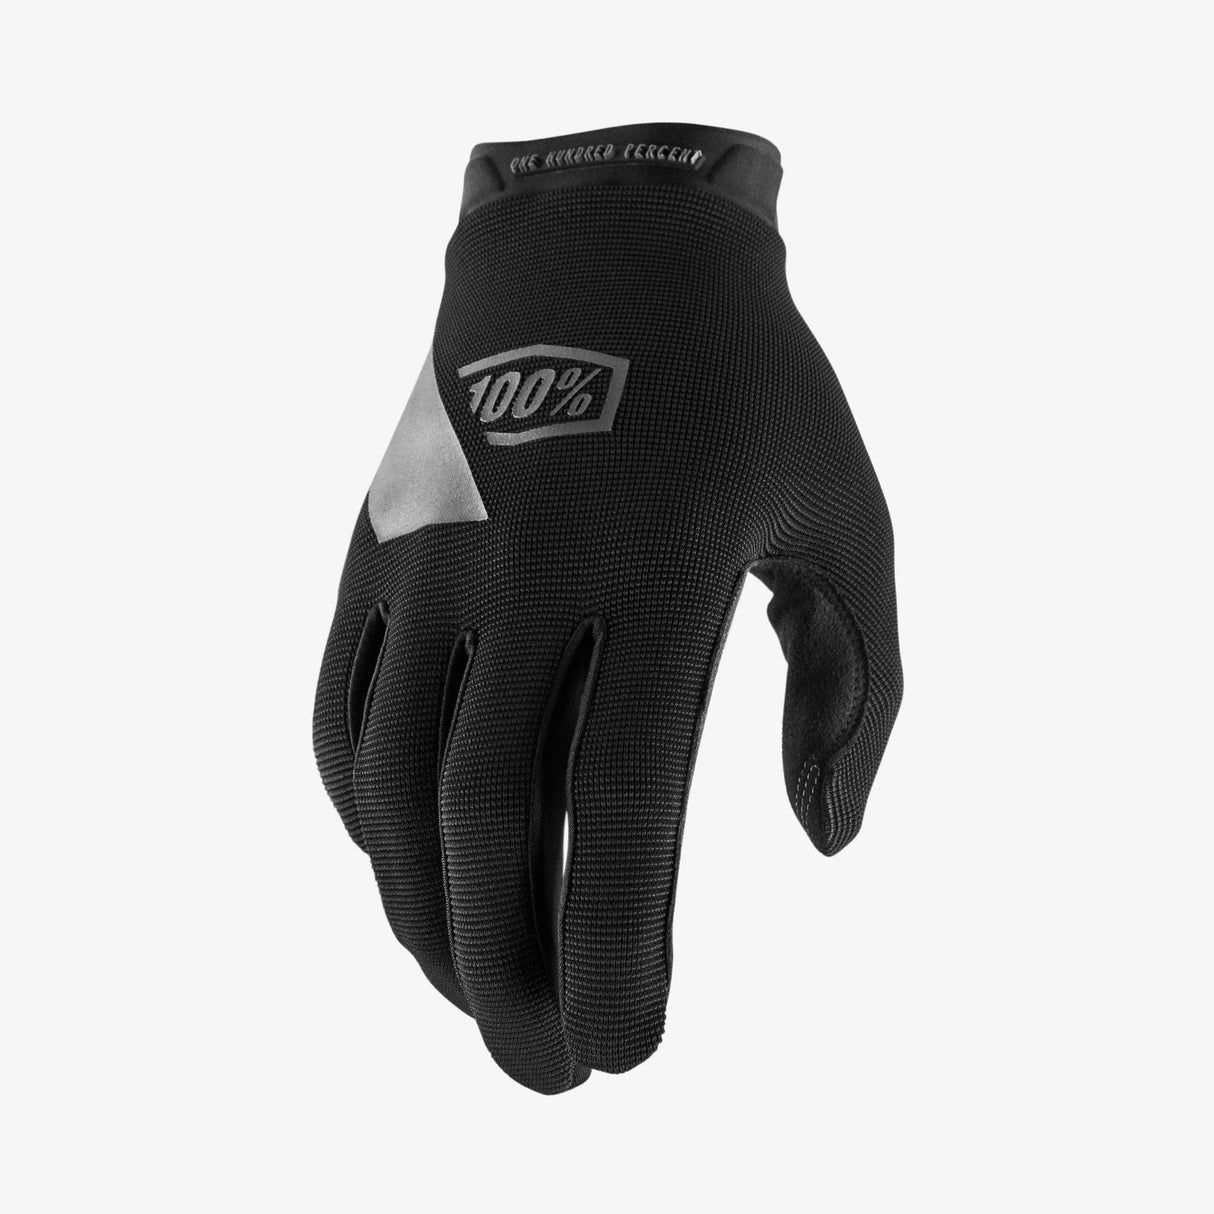 100 Percent RIDECAMP Youth Gloves Black/Charcoal